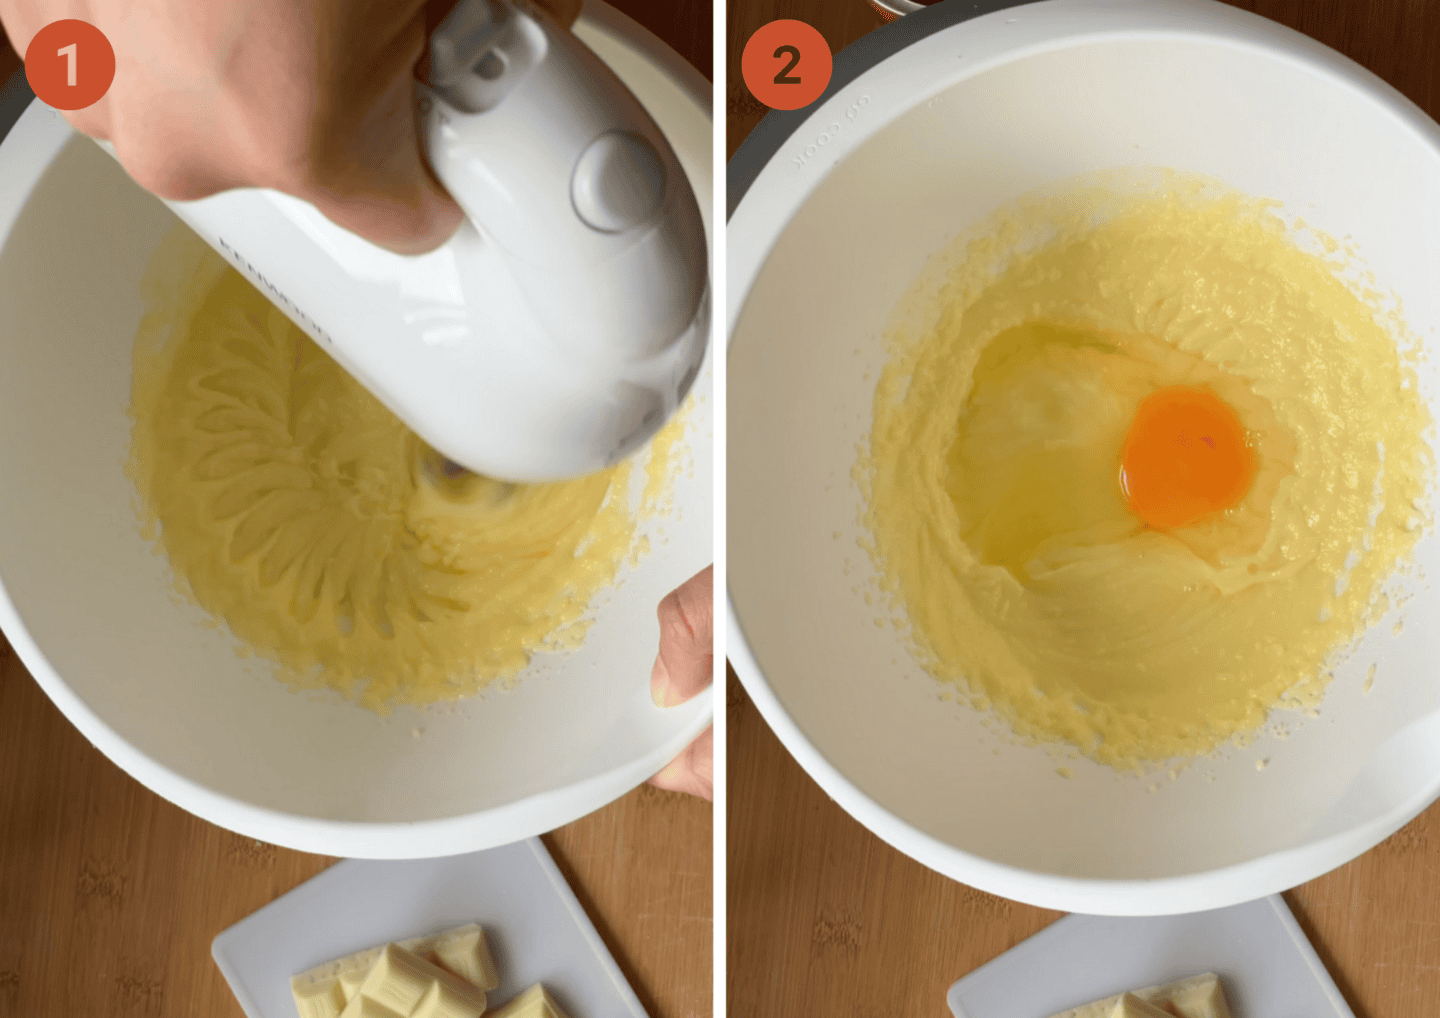 Mix the butter and sugar and then add an egg to the mixing bowl.